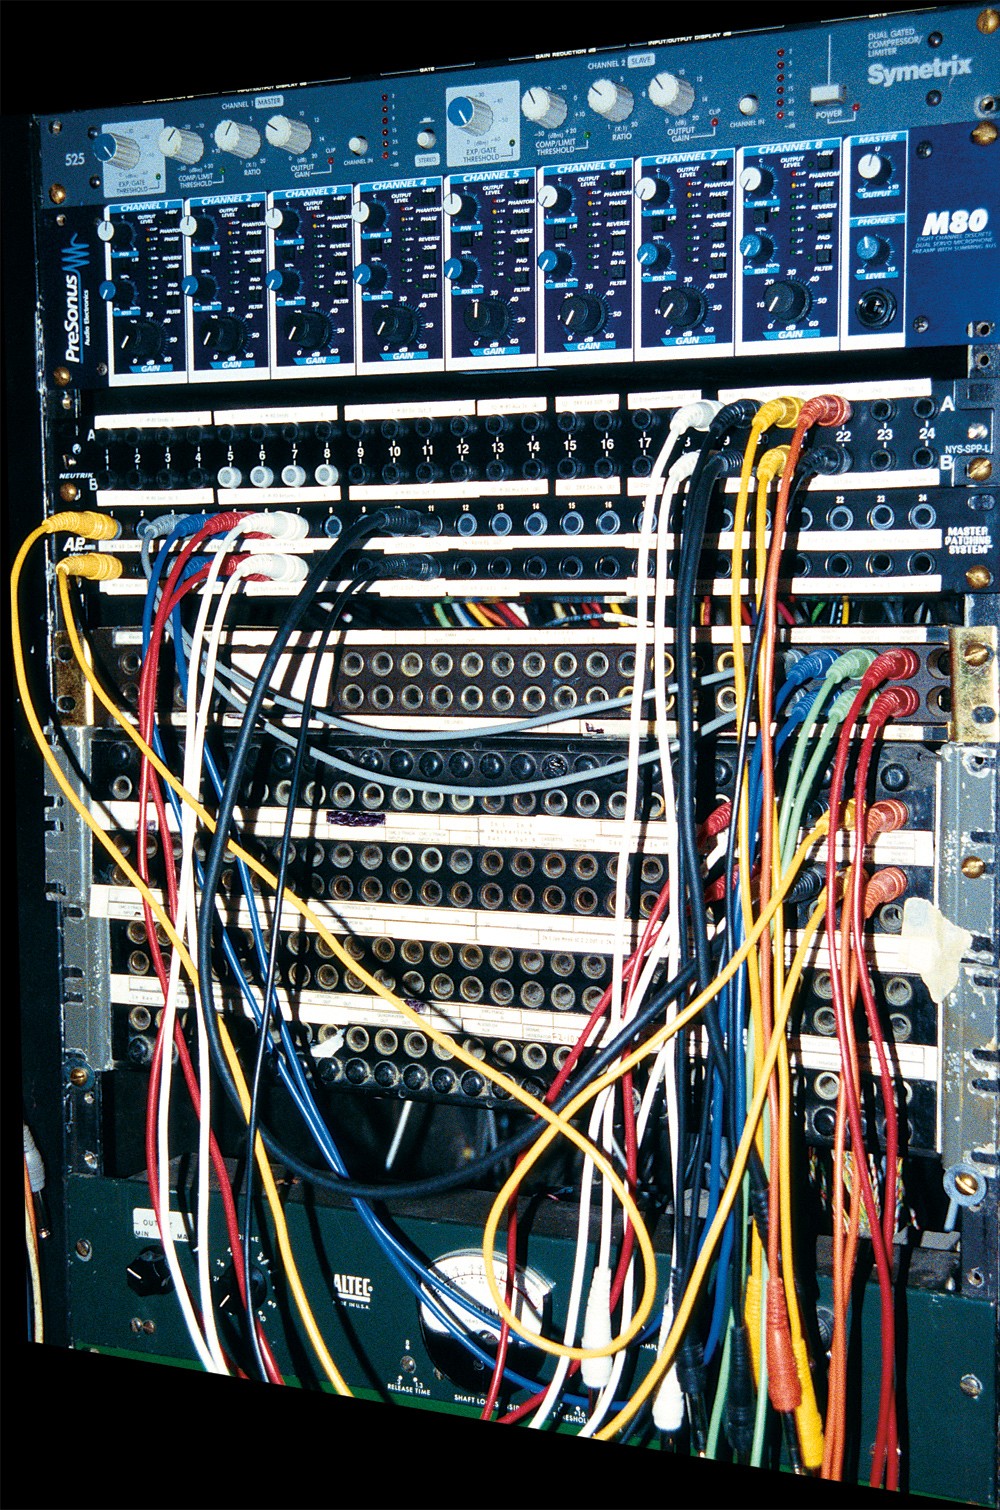 Image demonstrating an audio patch bay